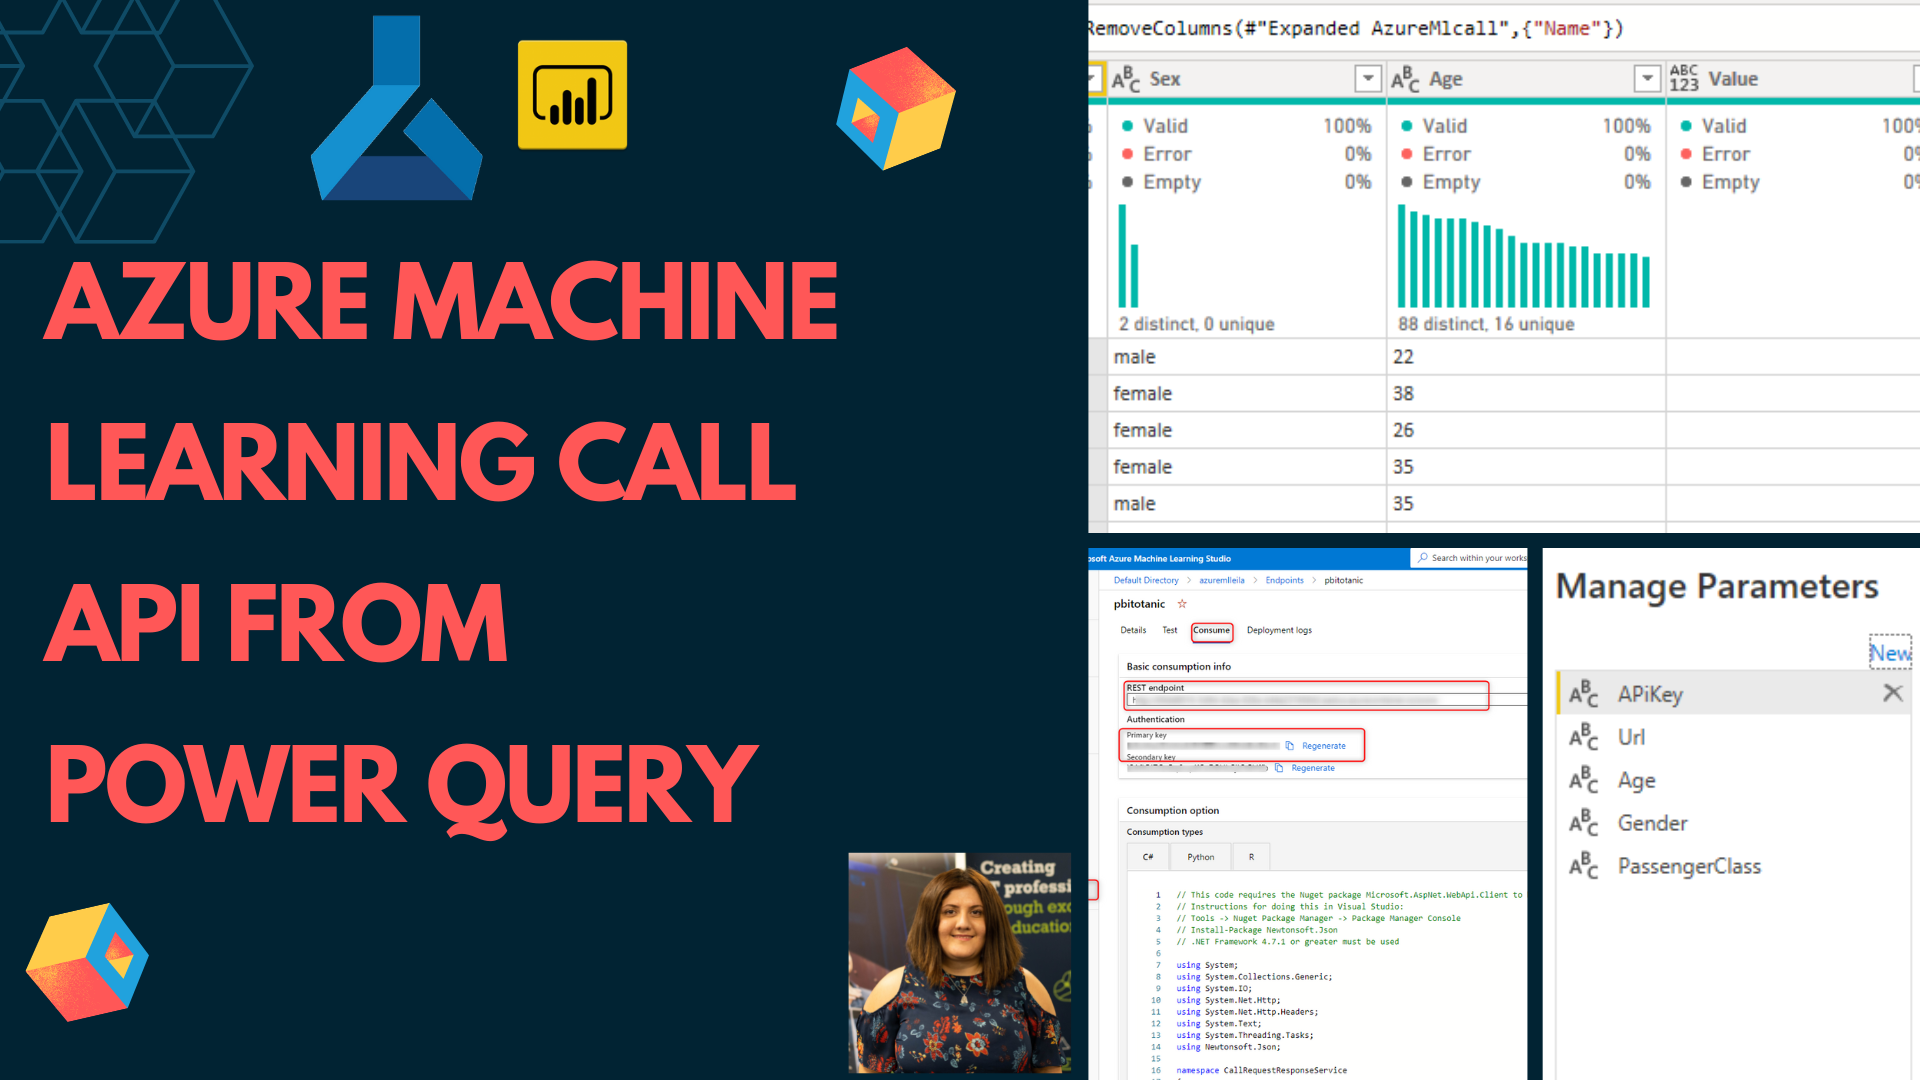 Azure Machine Learning Call API from Power Query